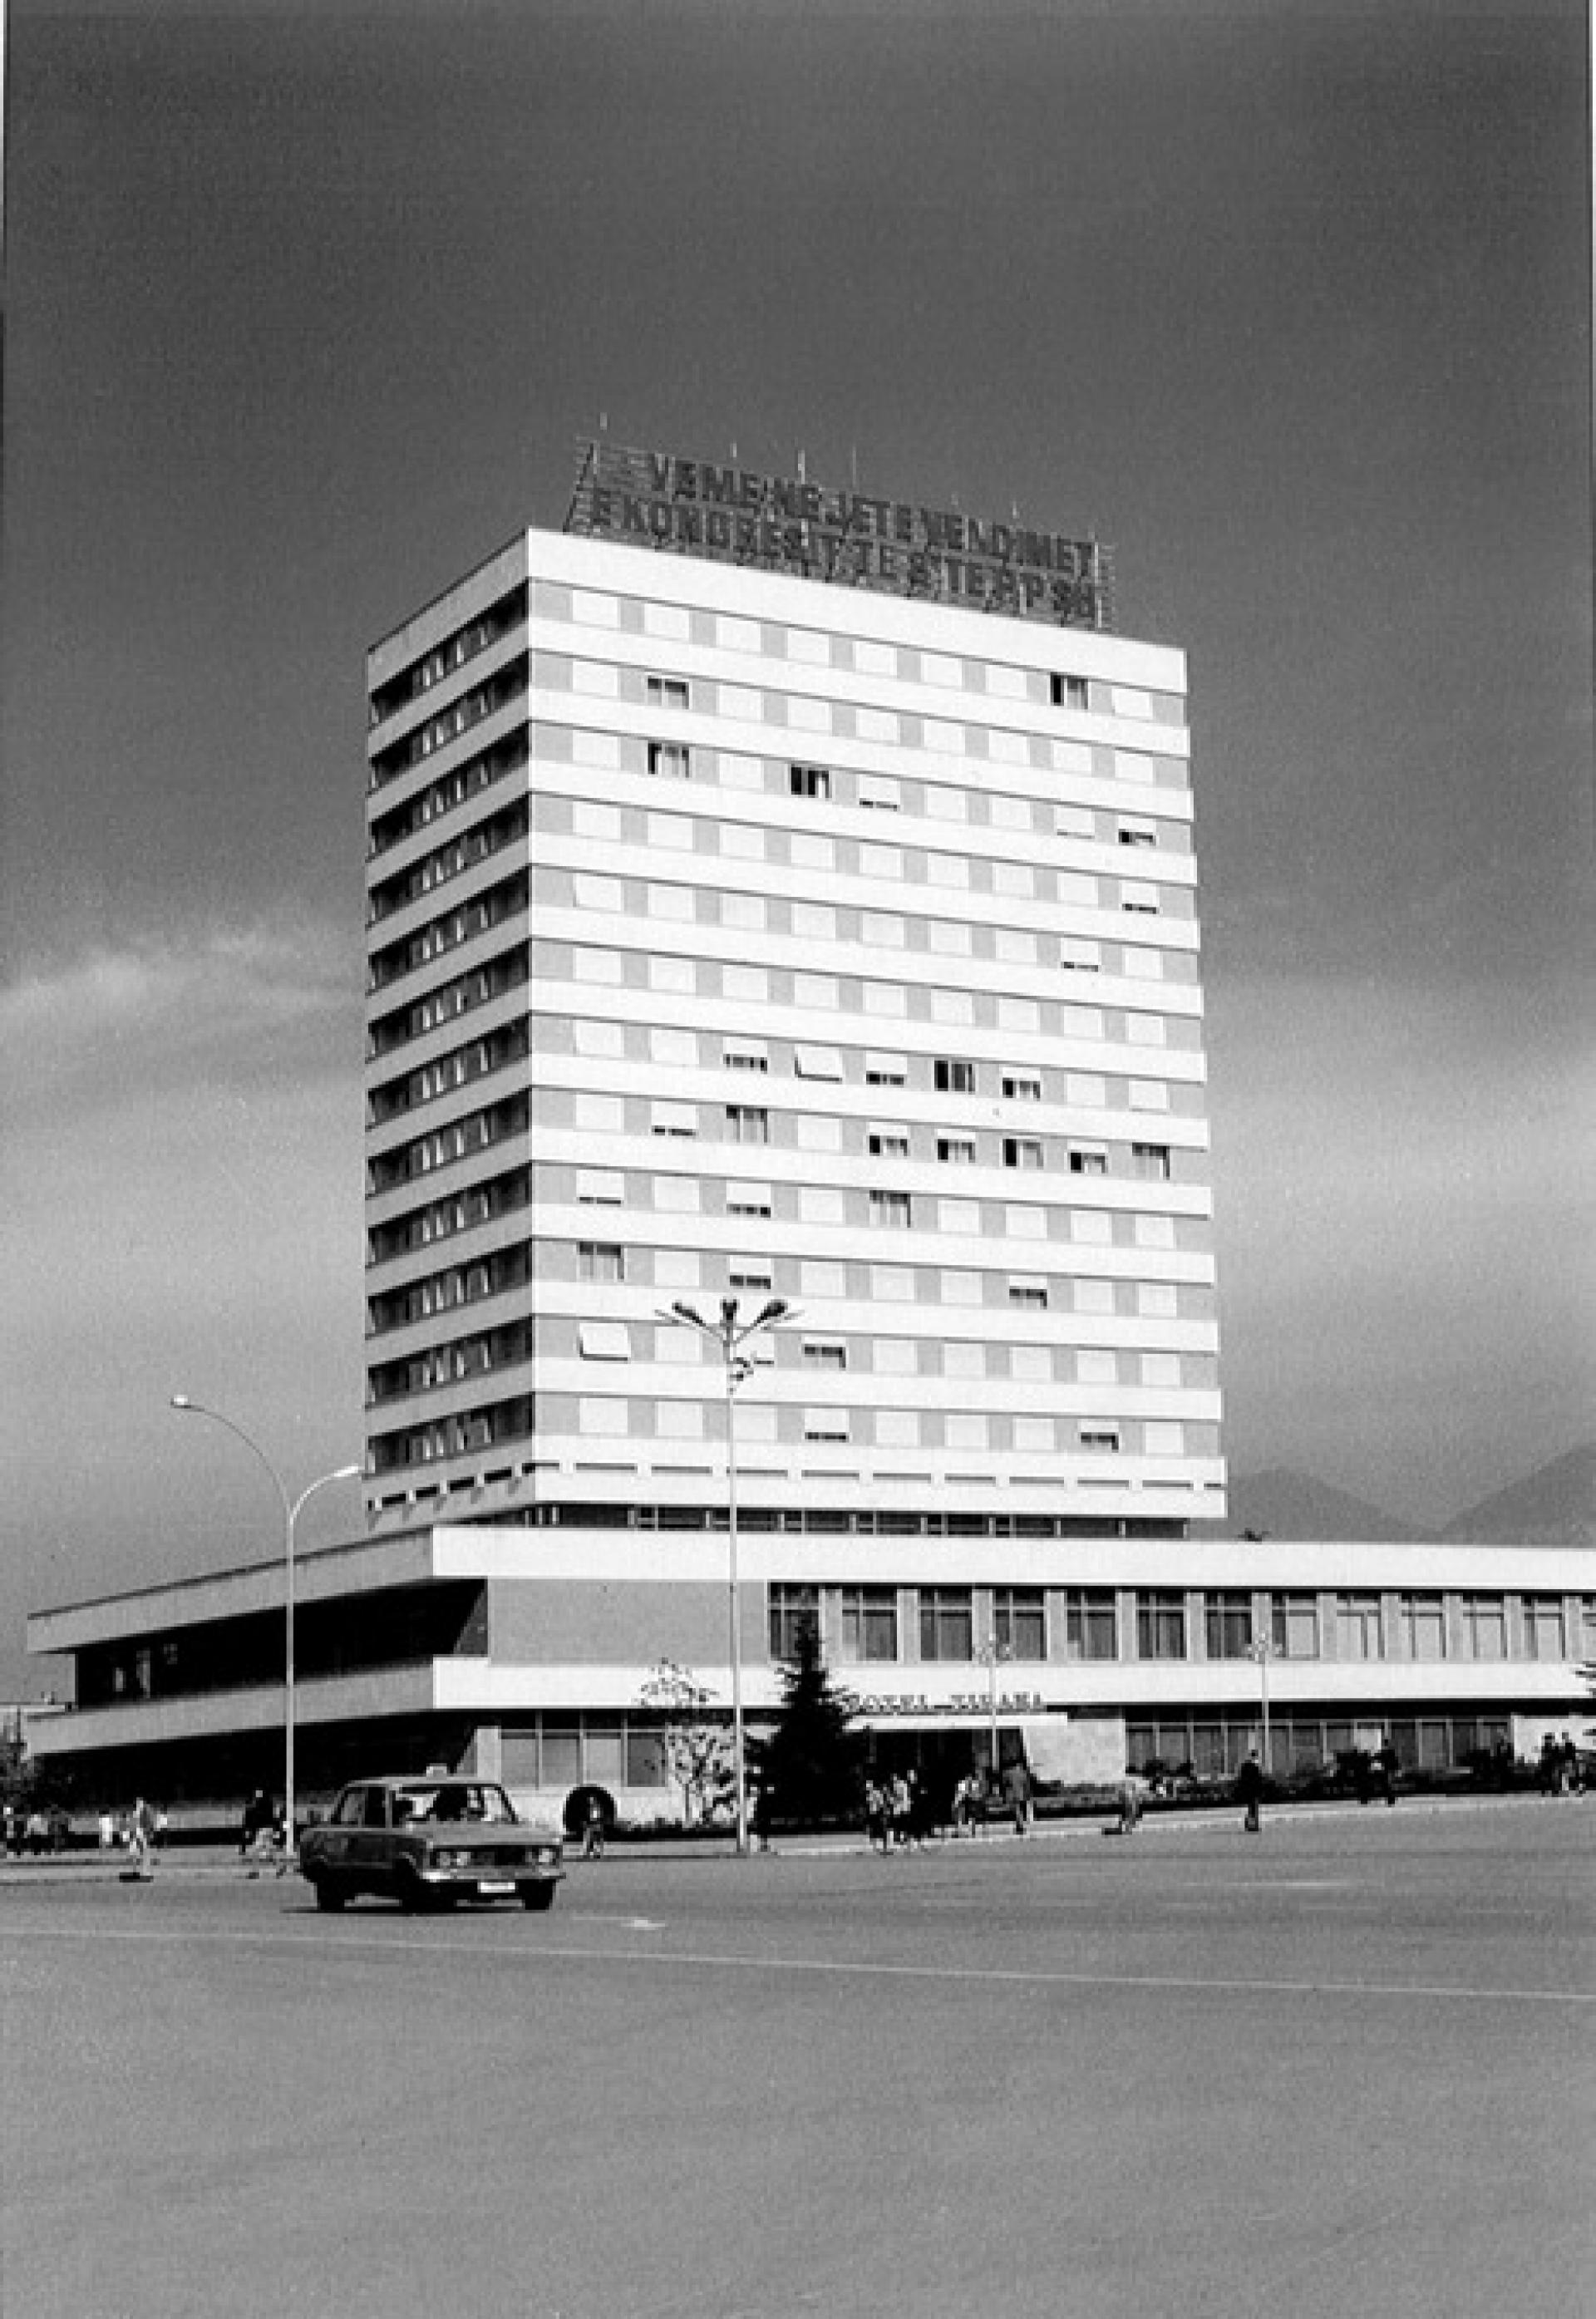 Hotel Tirana was seen from far away during the communist regime, when the city was dominated by small houses. It remained the highest building ever built in Albania for many years.